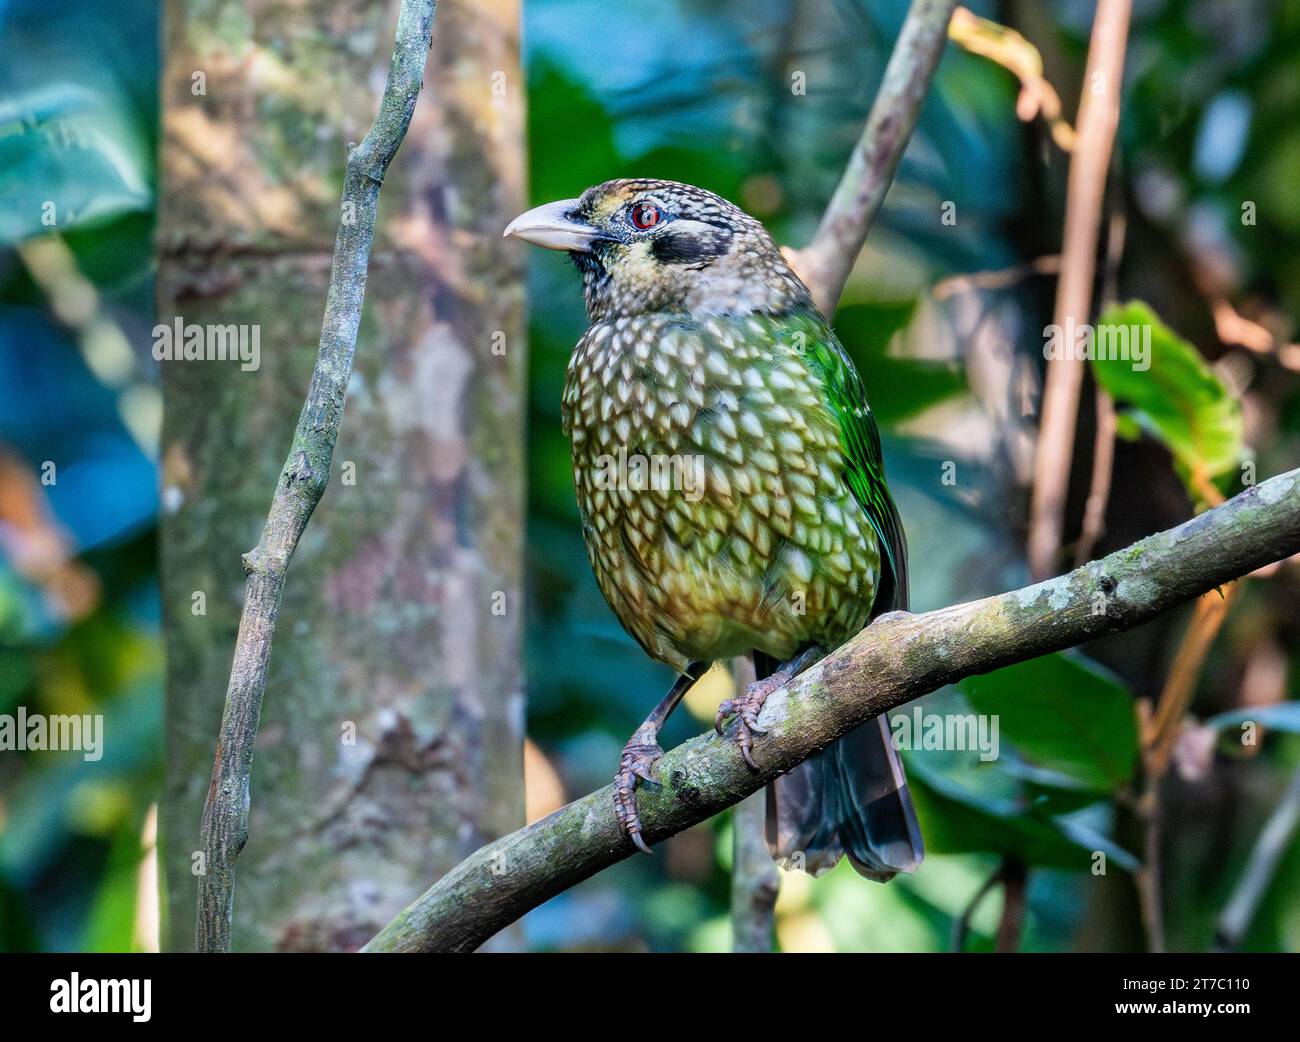 A Spotted Catbird (Ailuroedus maculosus) perched on a branch. Queensland, Australia. Stock Photo